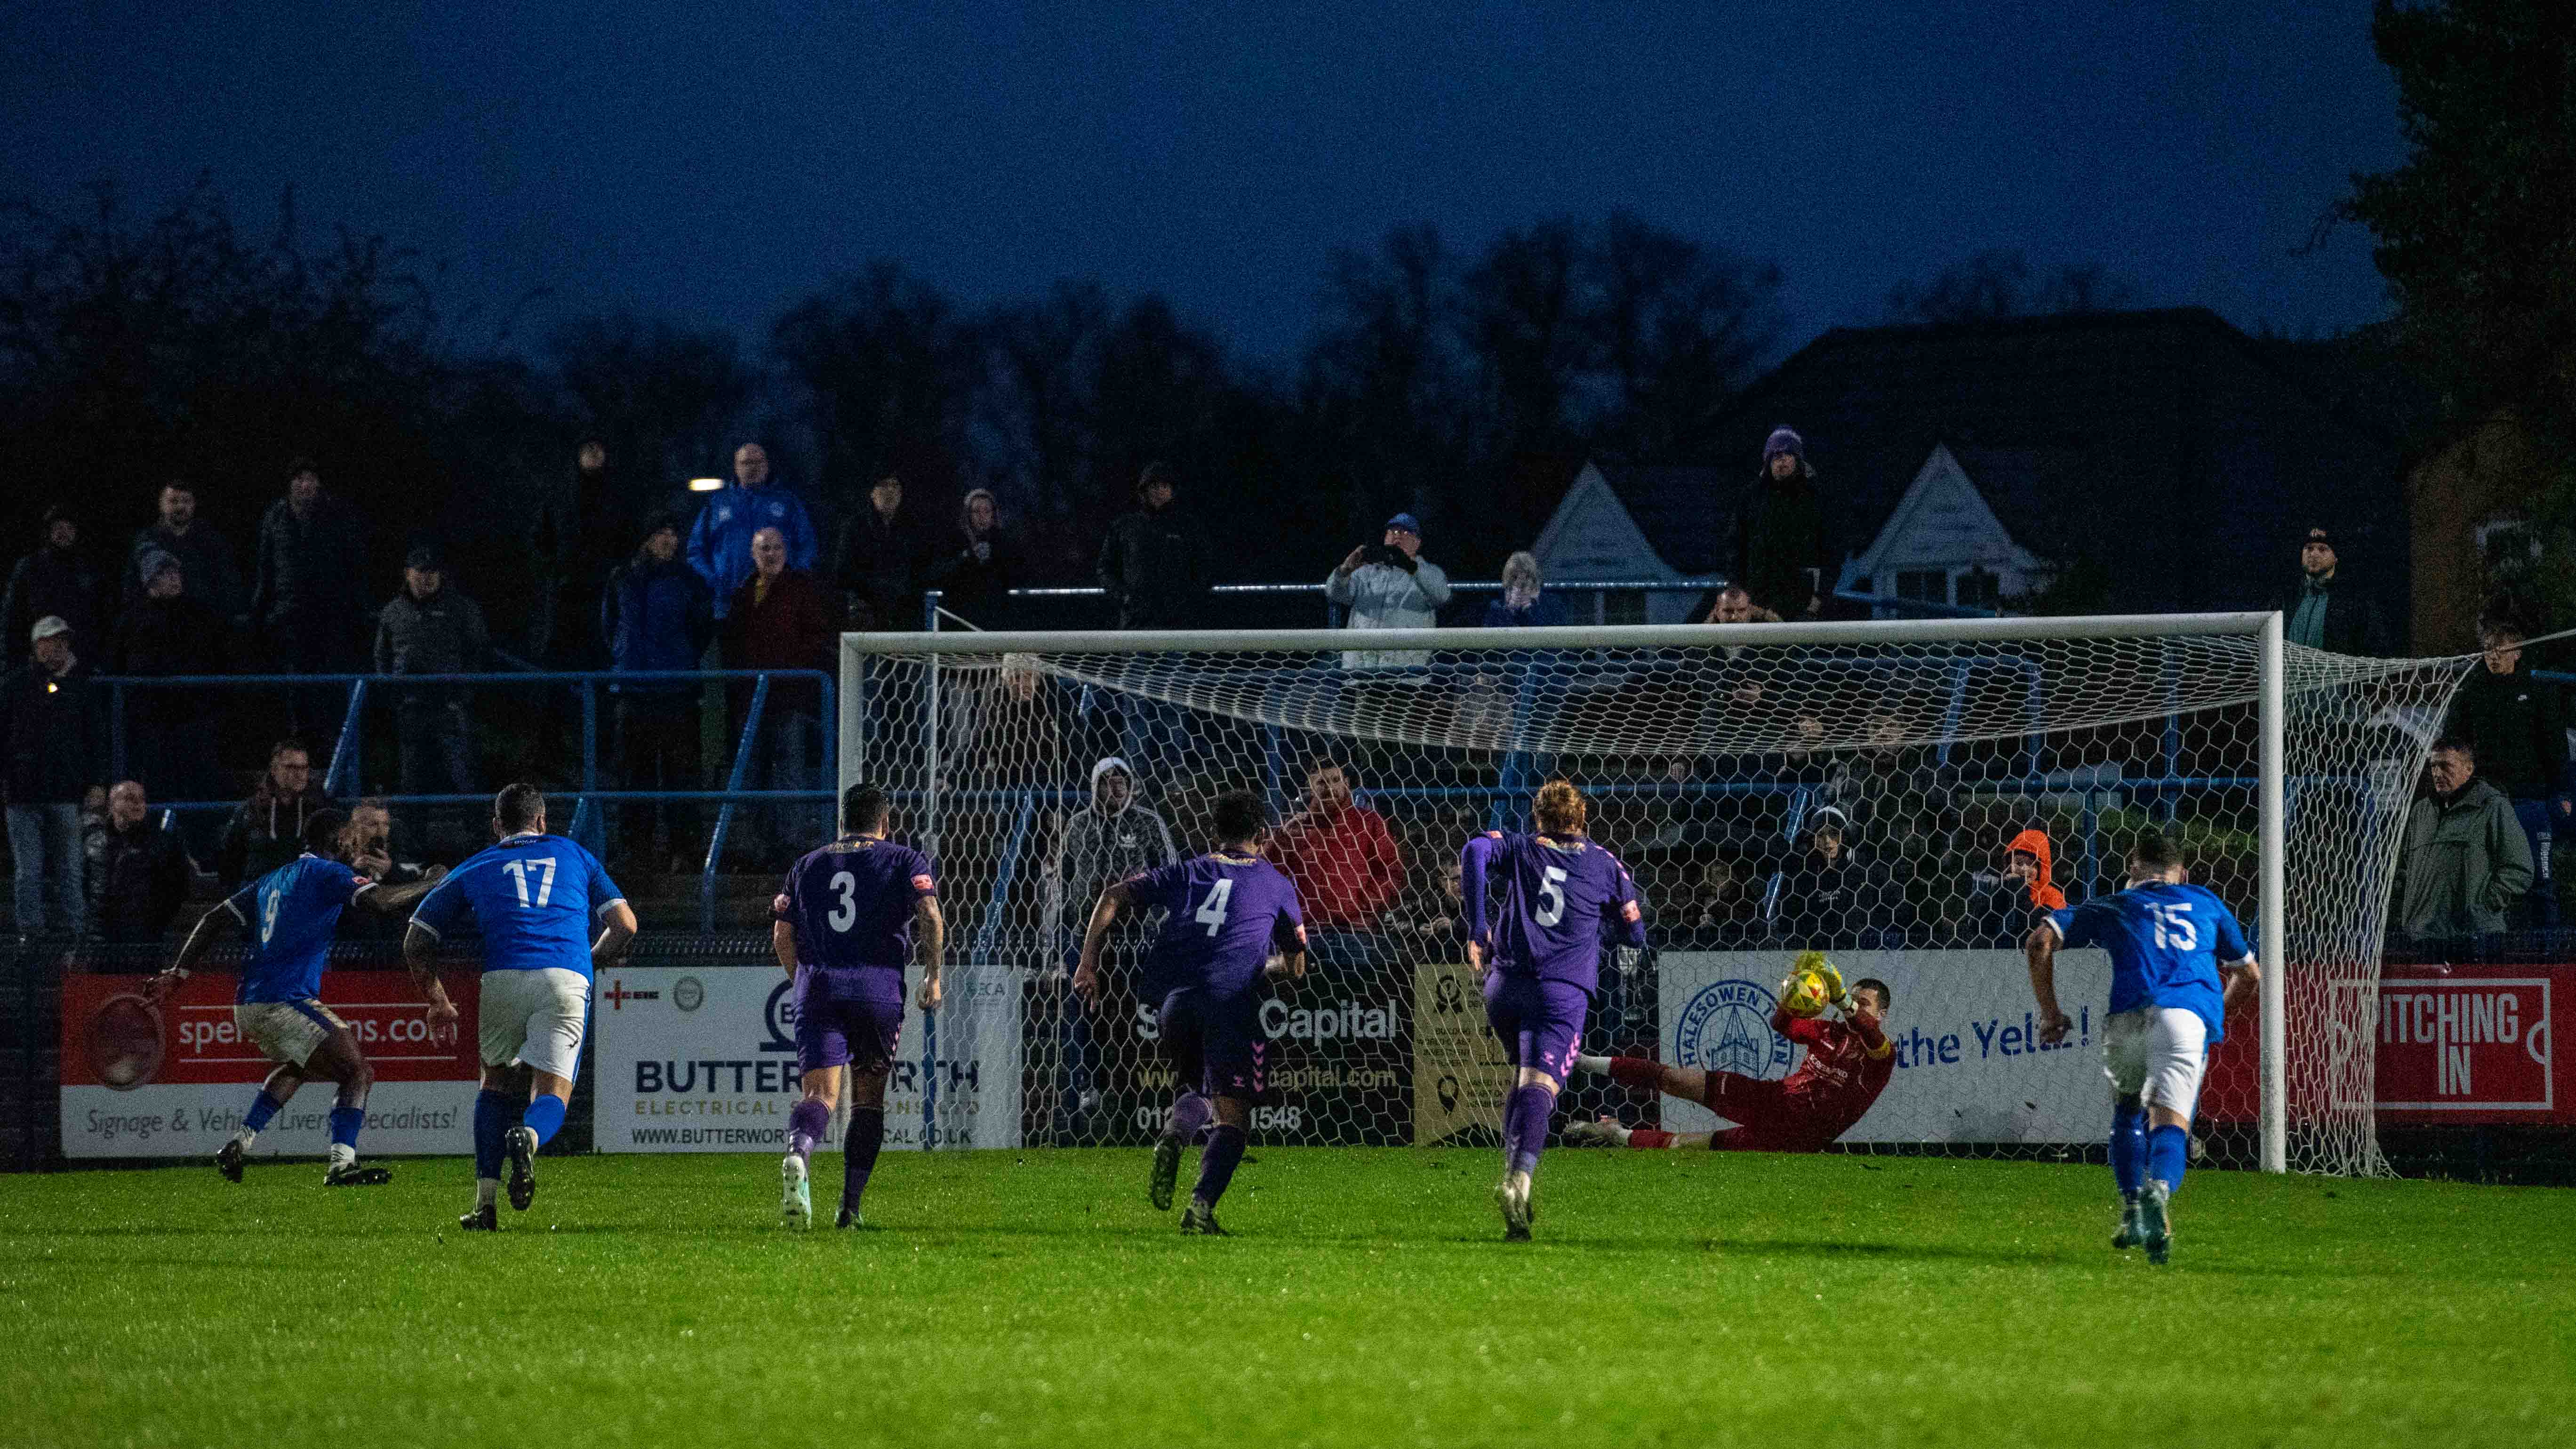 Not content with getting on the scoresheet Hitchin Town keeper Charlie Horlock then saves a last minute penalty to help the Canaries win the game. CREDIT: PETER ELSE 